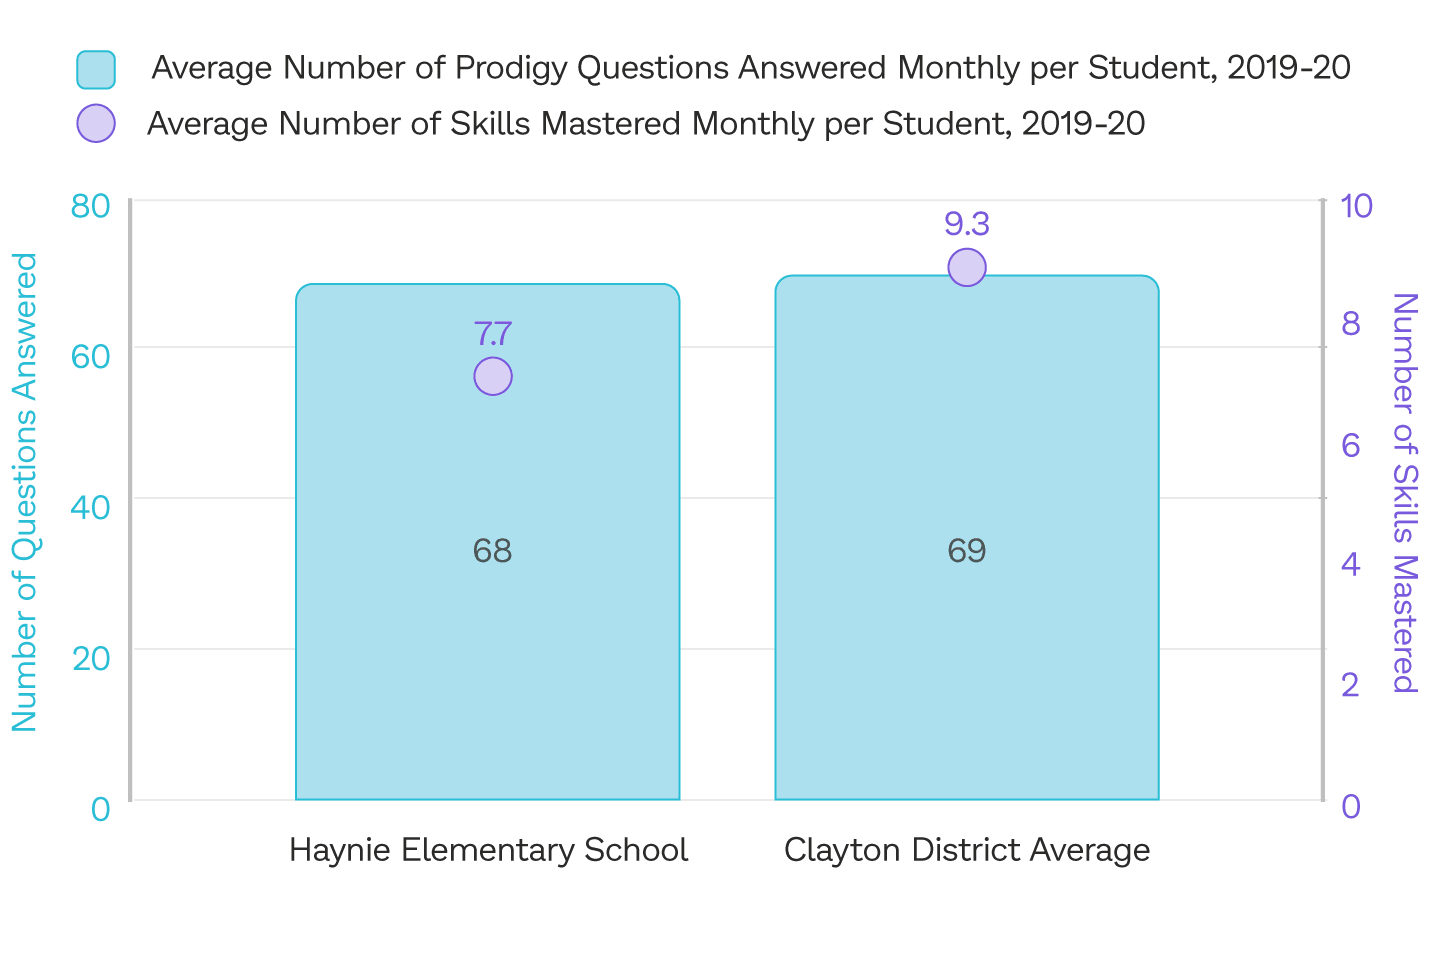 The average number of questions answered and math skills mastered by students in Clayton County Public Schools who play Prodigy, compared to Haynie Elementary.